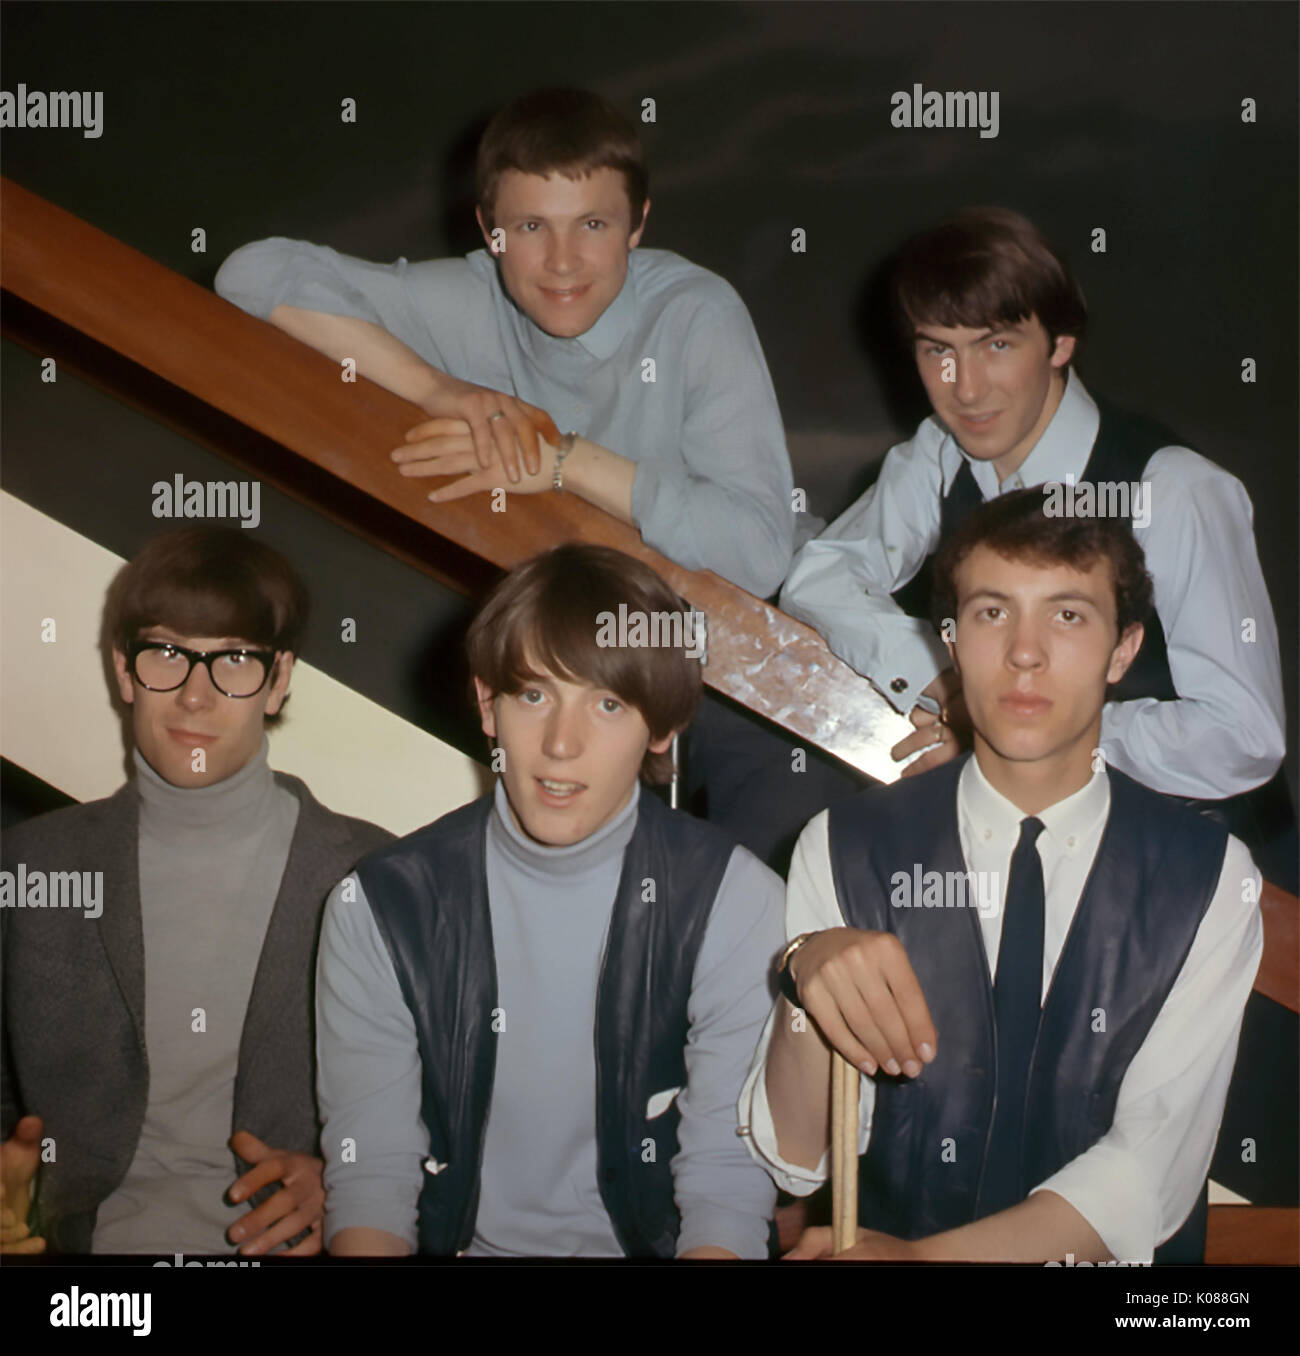 MOJOS UK pop group in March 1964 before appearing on Ready, Steady,Go.  Clockwise from top left: Terry O'Toole, John Konrad, Nicky Crouch, Stu James, Keith Karlson. Photo: Tony Gale Stock Photo